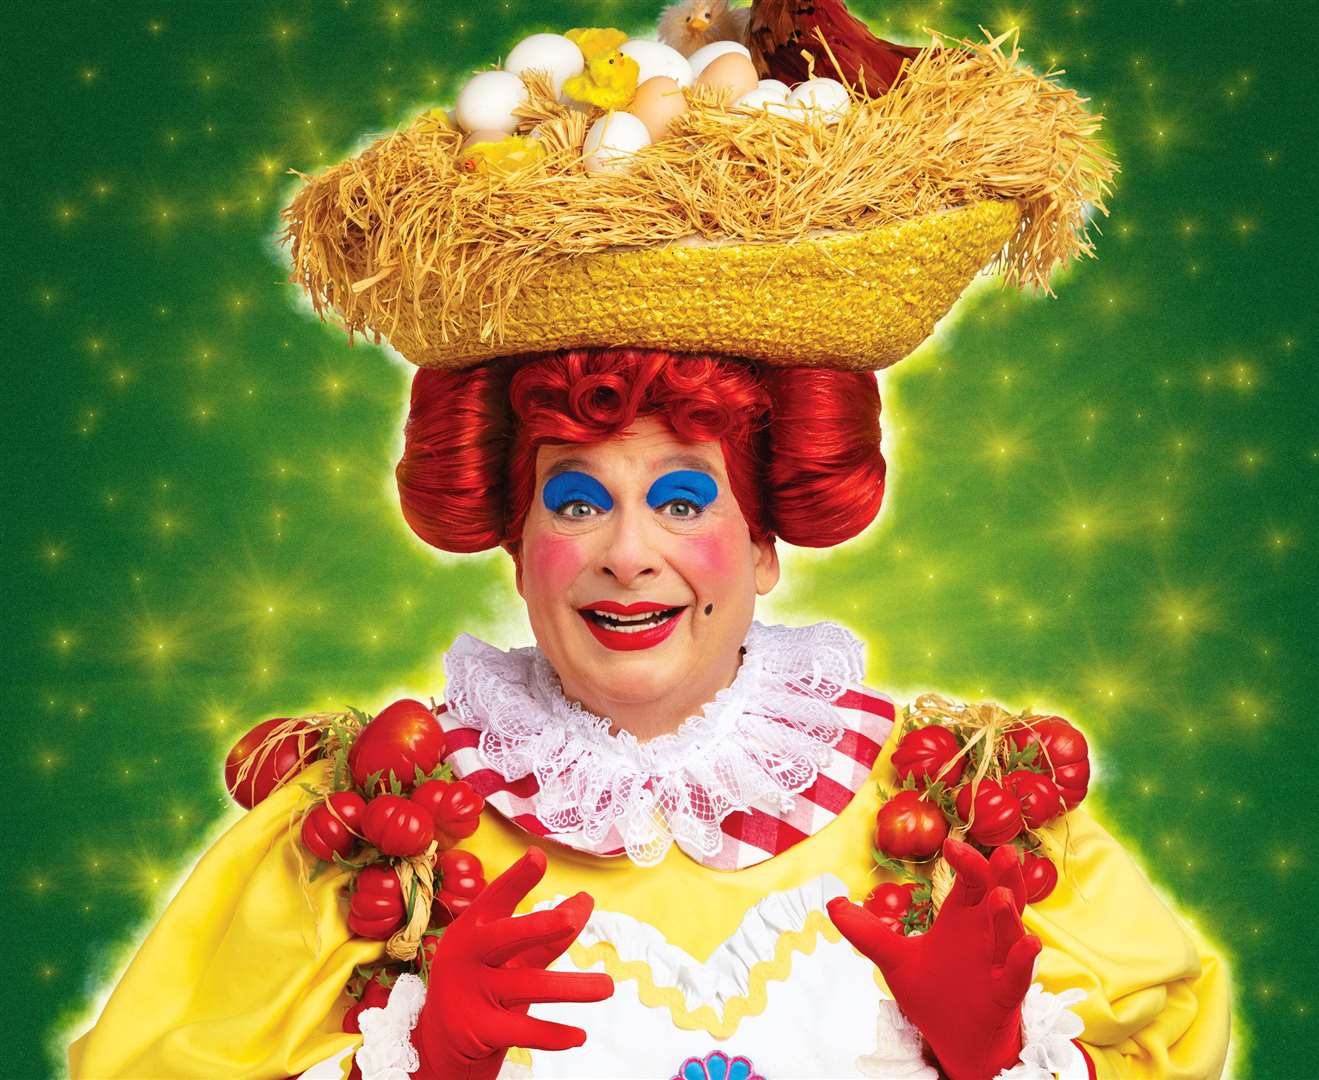 Christopher Biggins will star in this year's pantomime at the Dartford Orchard Theatre